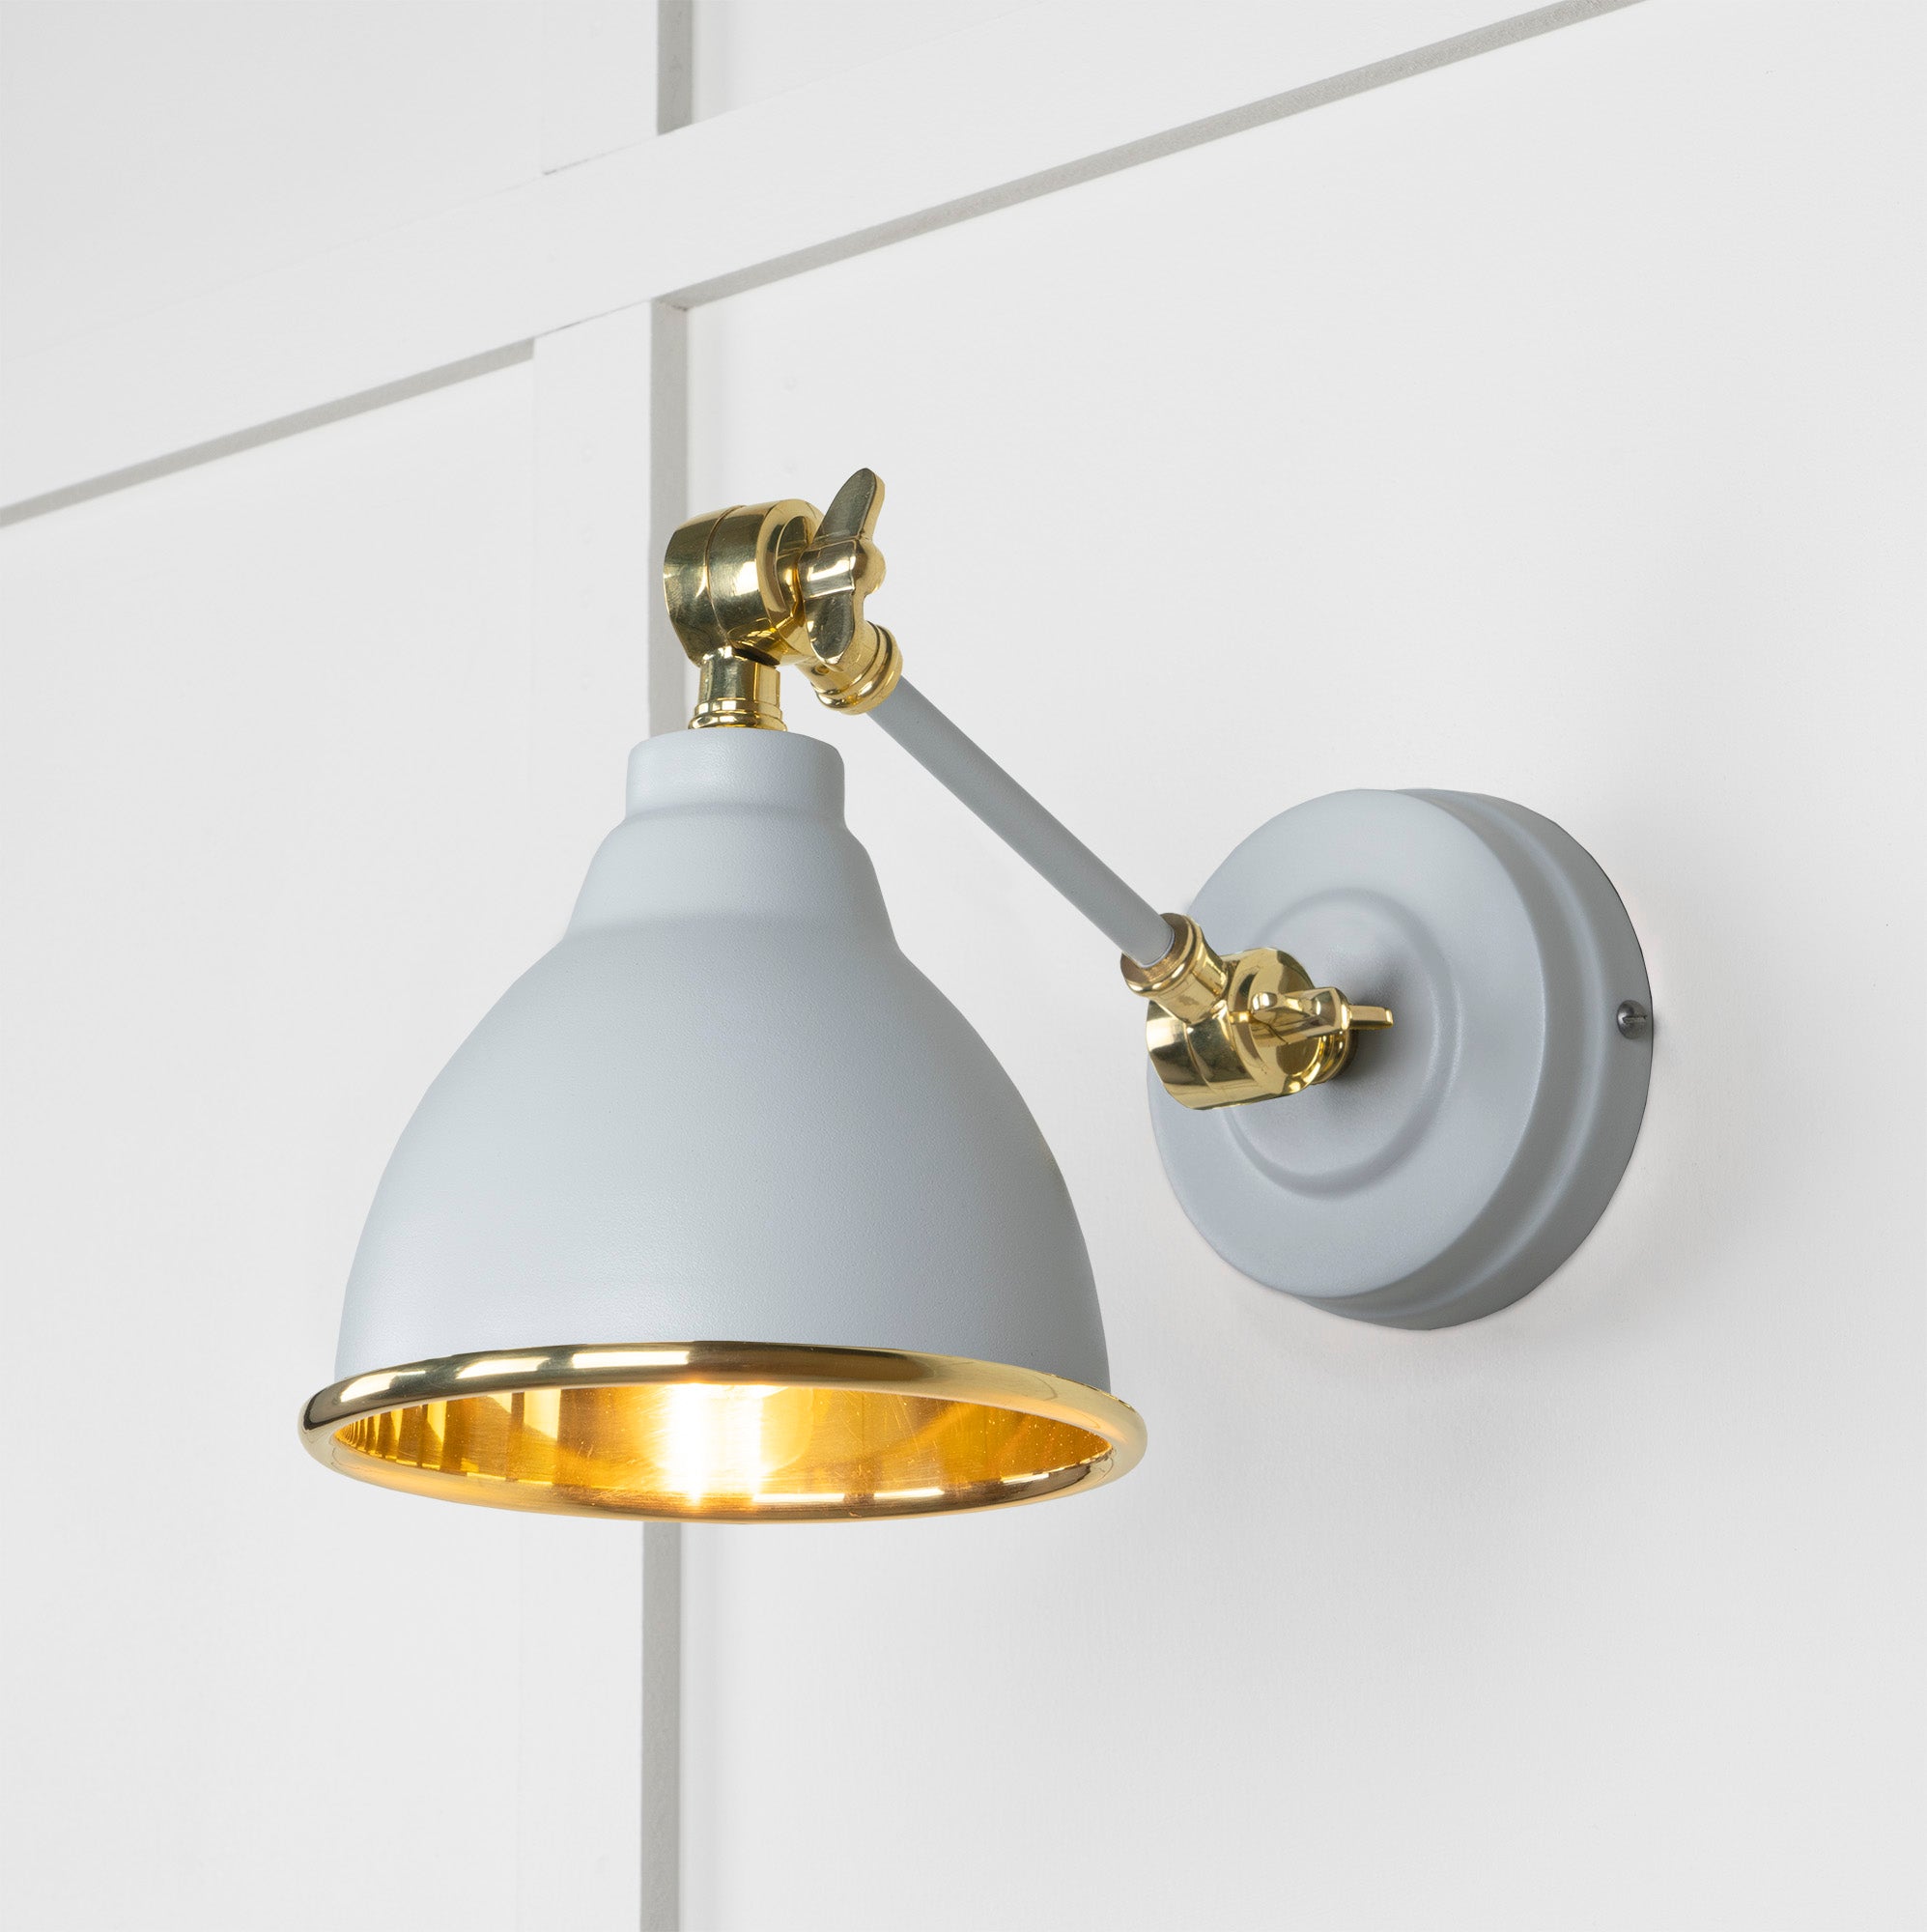 SHOW Close Up Image Harborne Ceiling Light in Burnished Brass In Hammered Brass